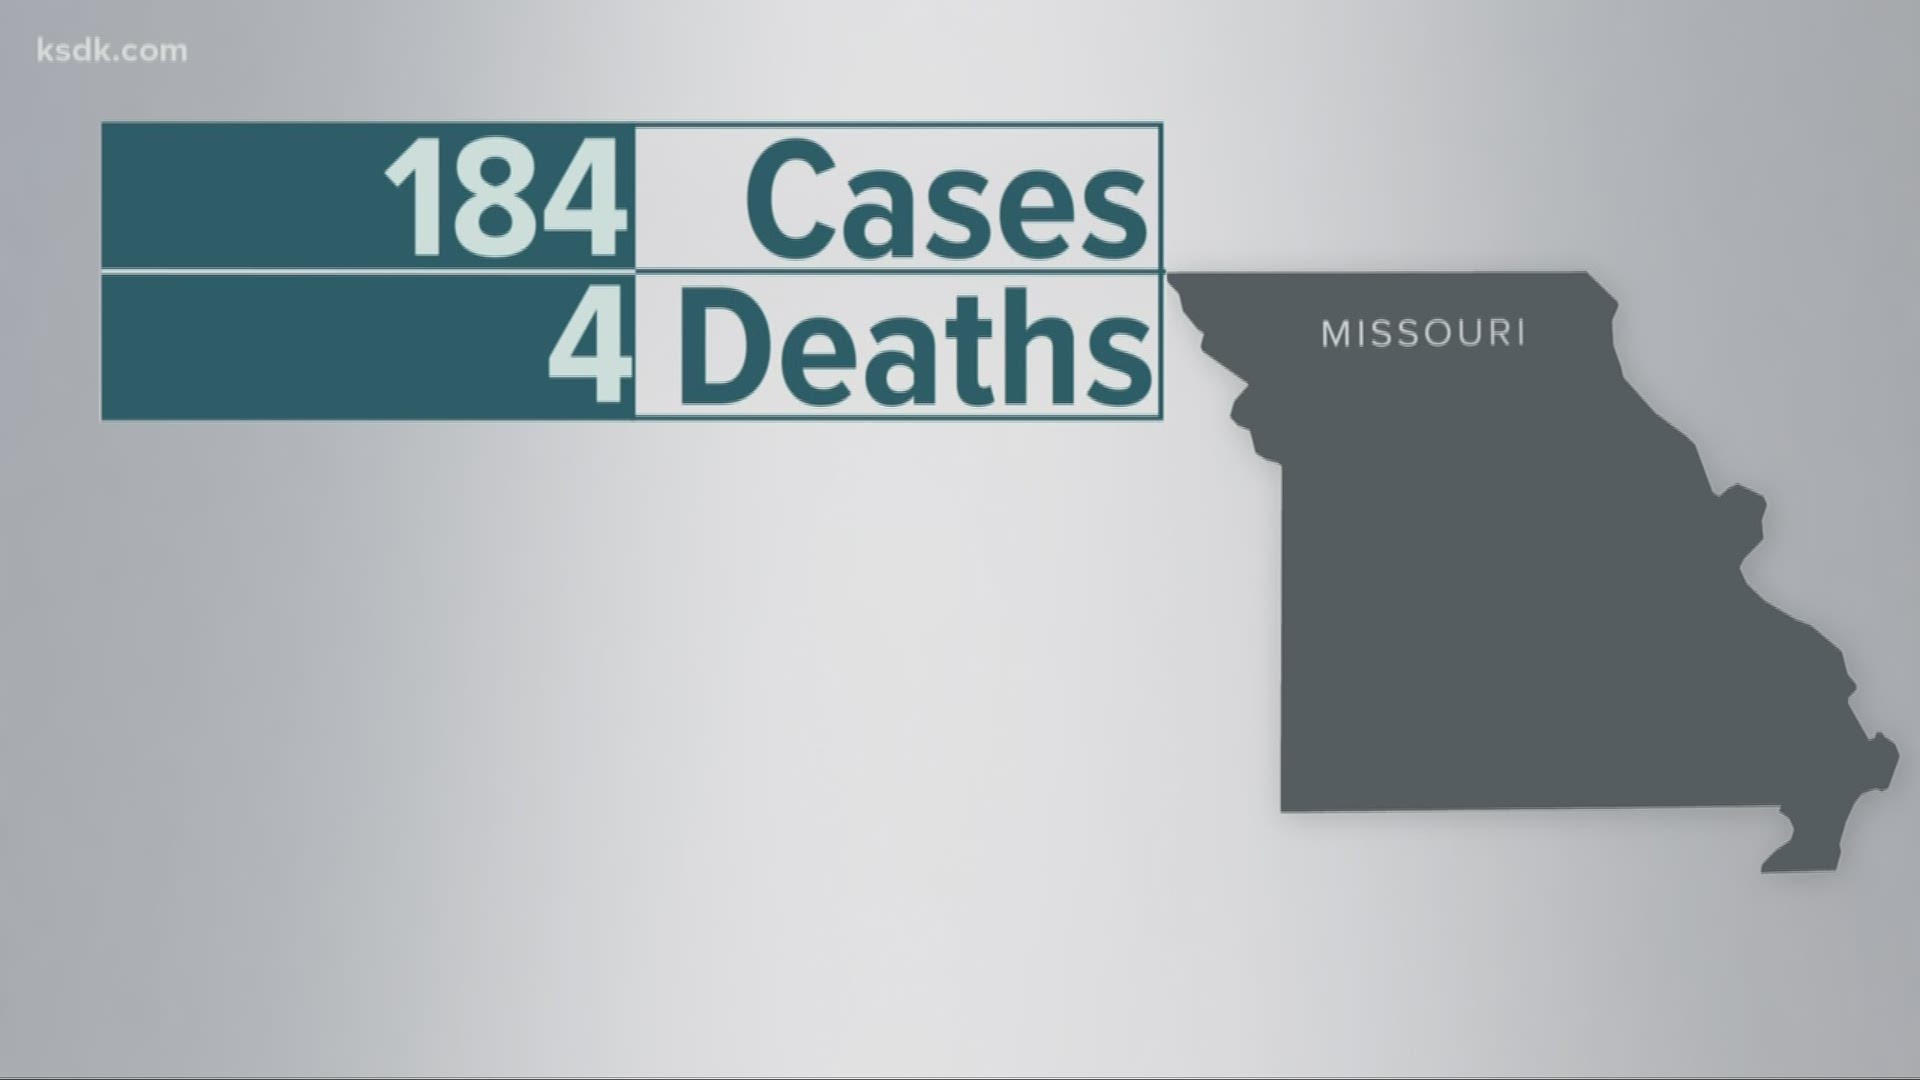 Missouri now has 184 cases and Illinois is up to 1,285.